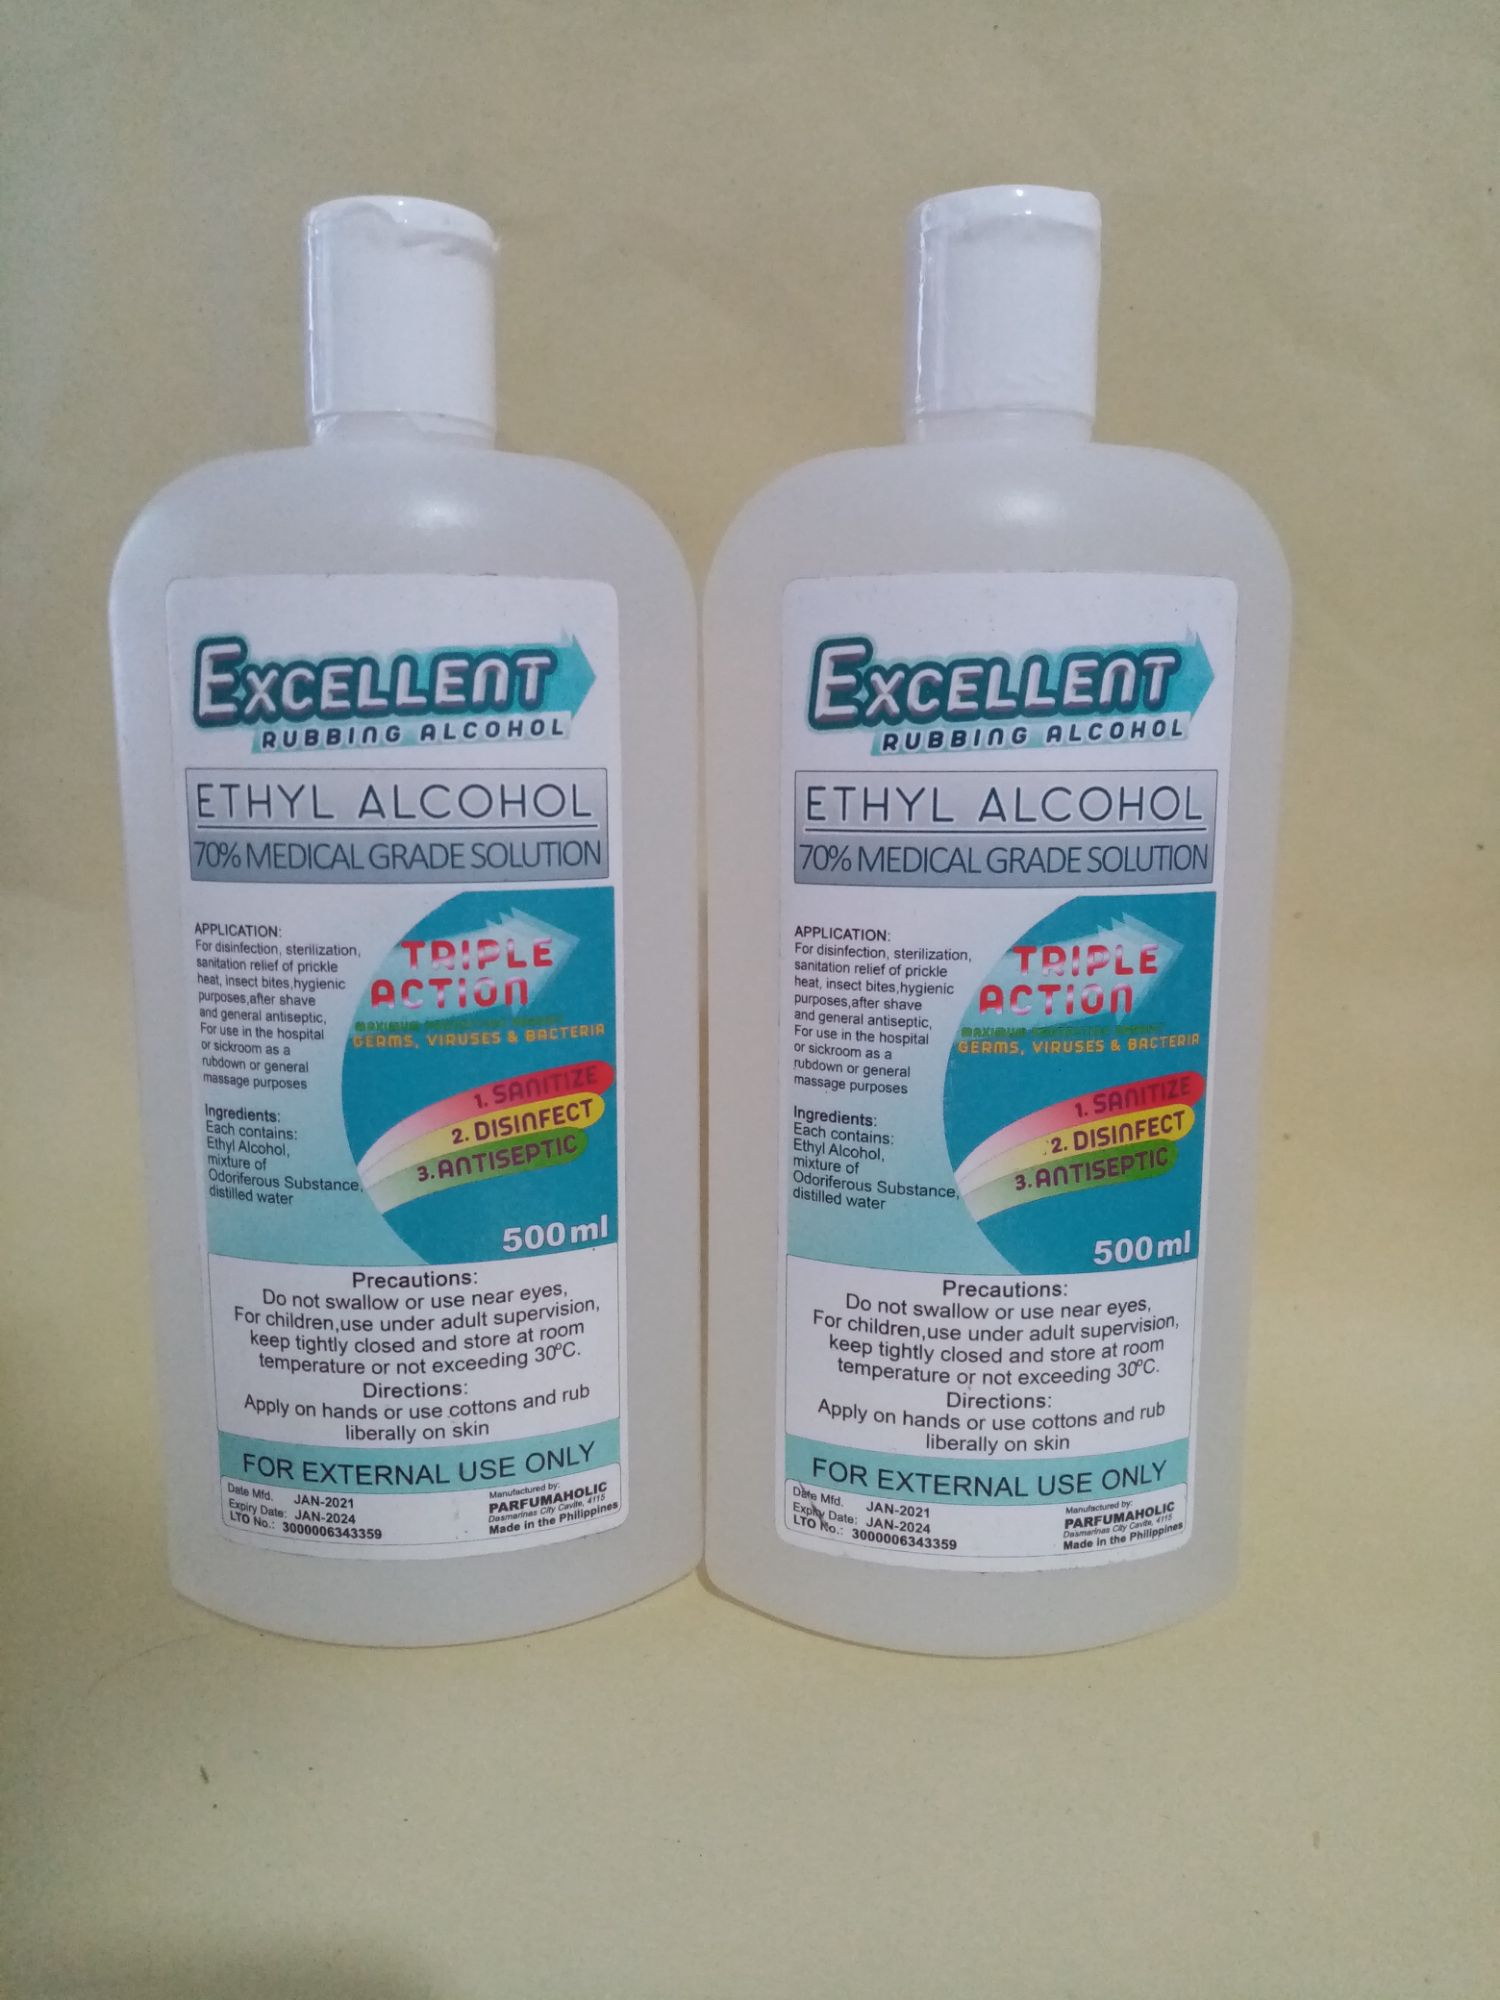 Excellent Ethyl Alcohol, 70% Solution, Kills Bacteria and Germs